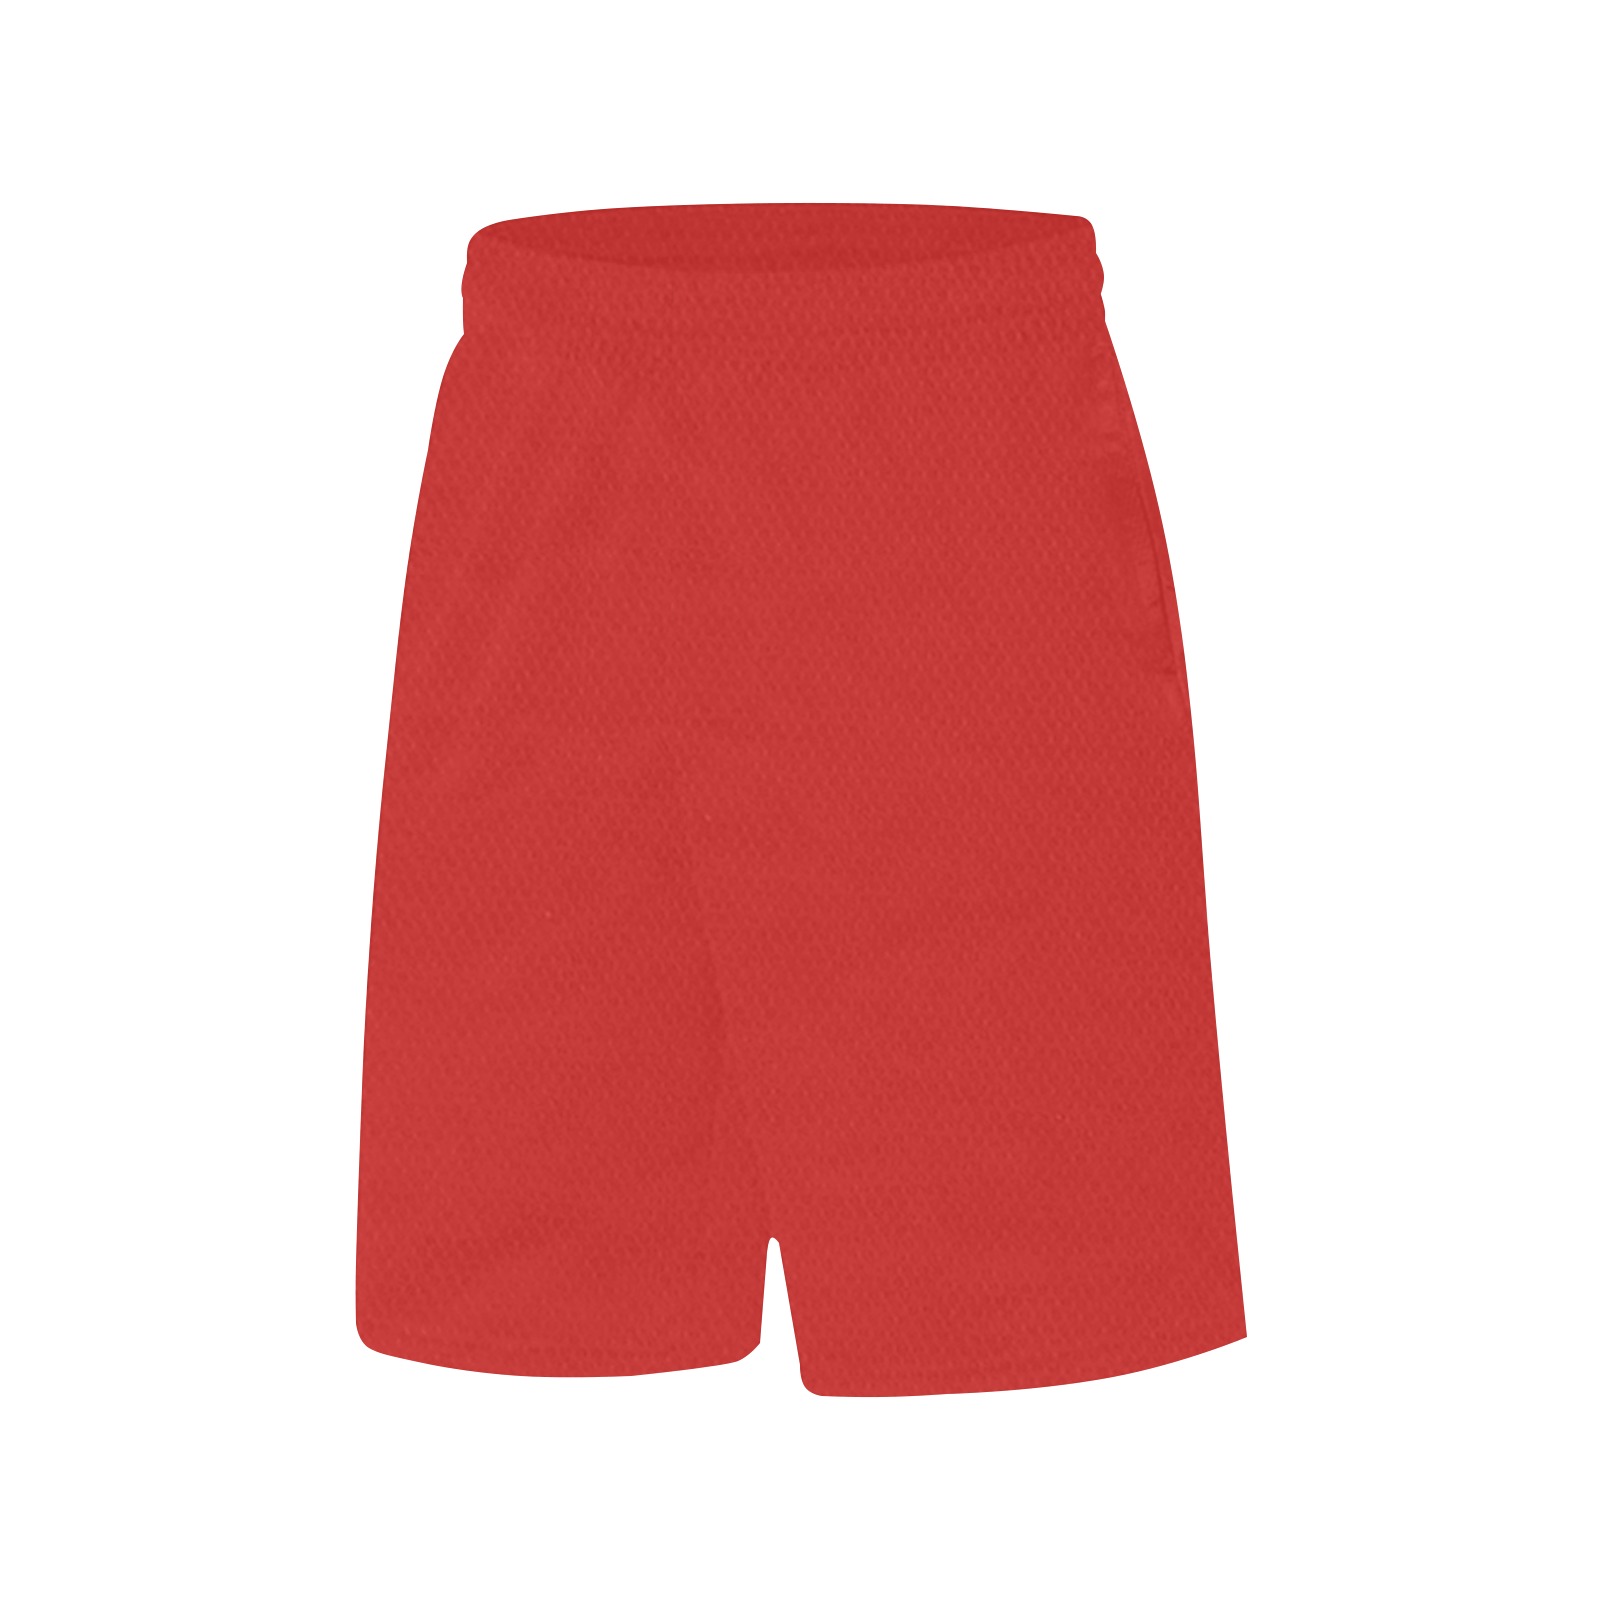 red All Over Print Basketball Shorts with Pocket